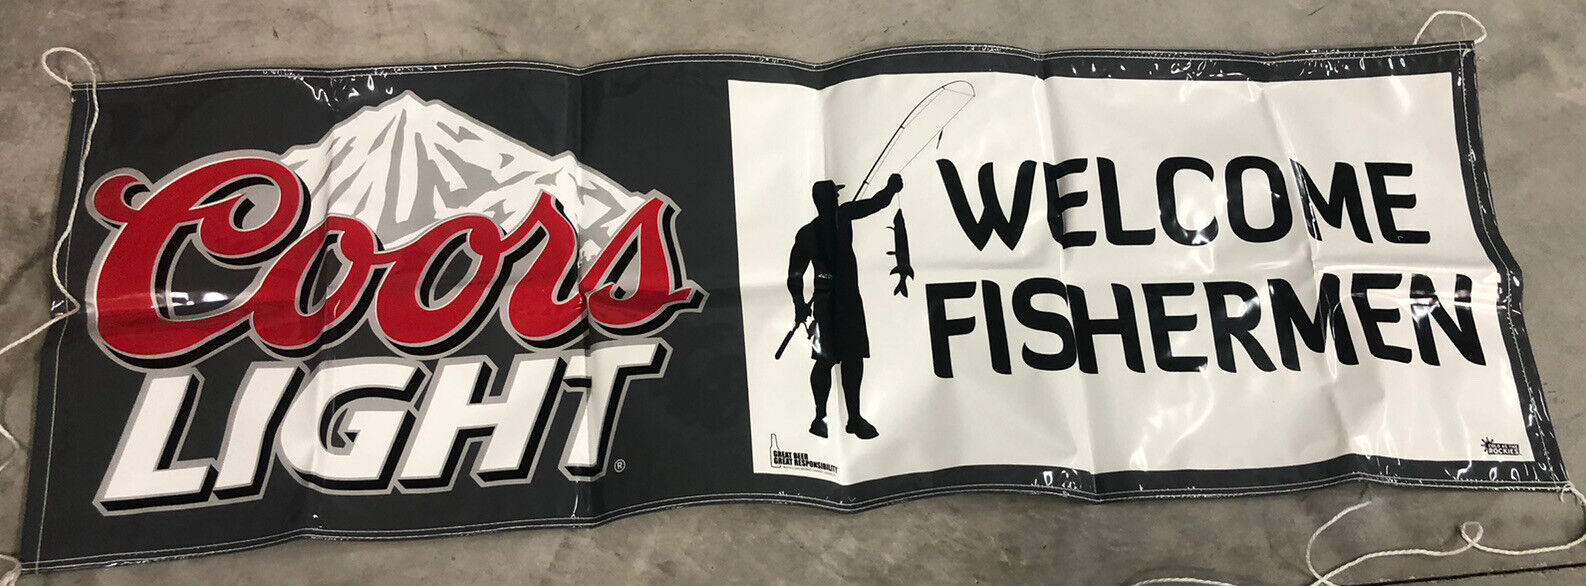 🐟 Coors Light Welcome Fisherman 2x6ft - Brand New 🍻